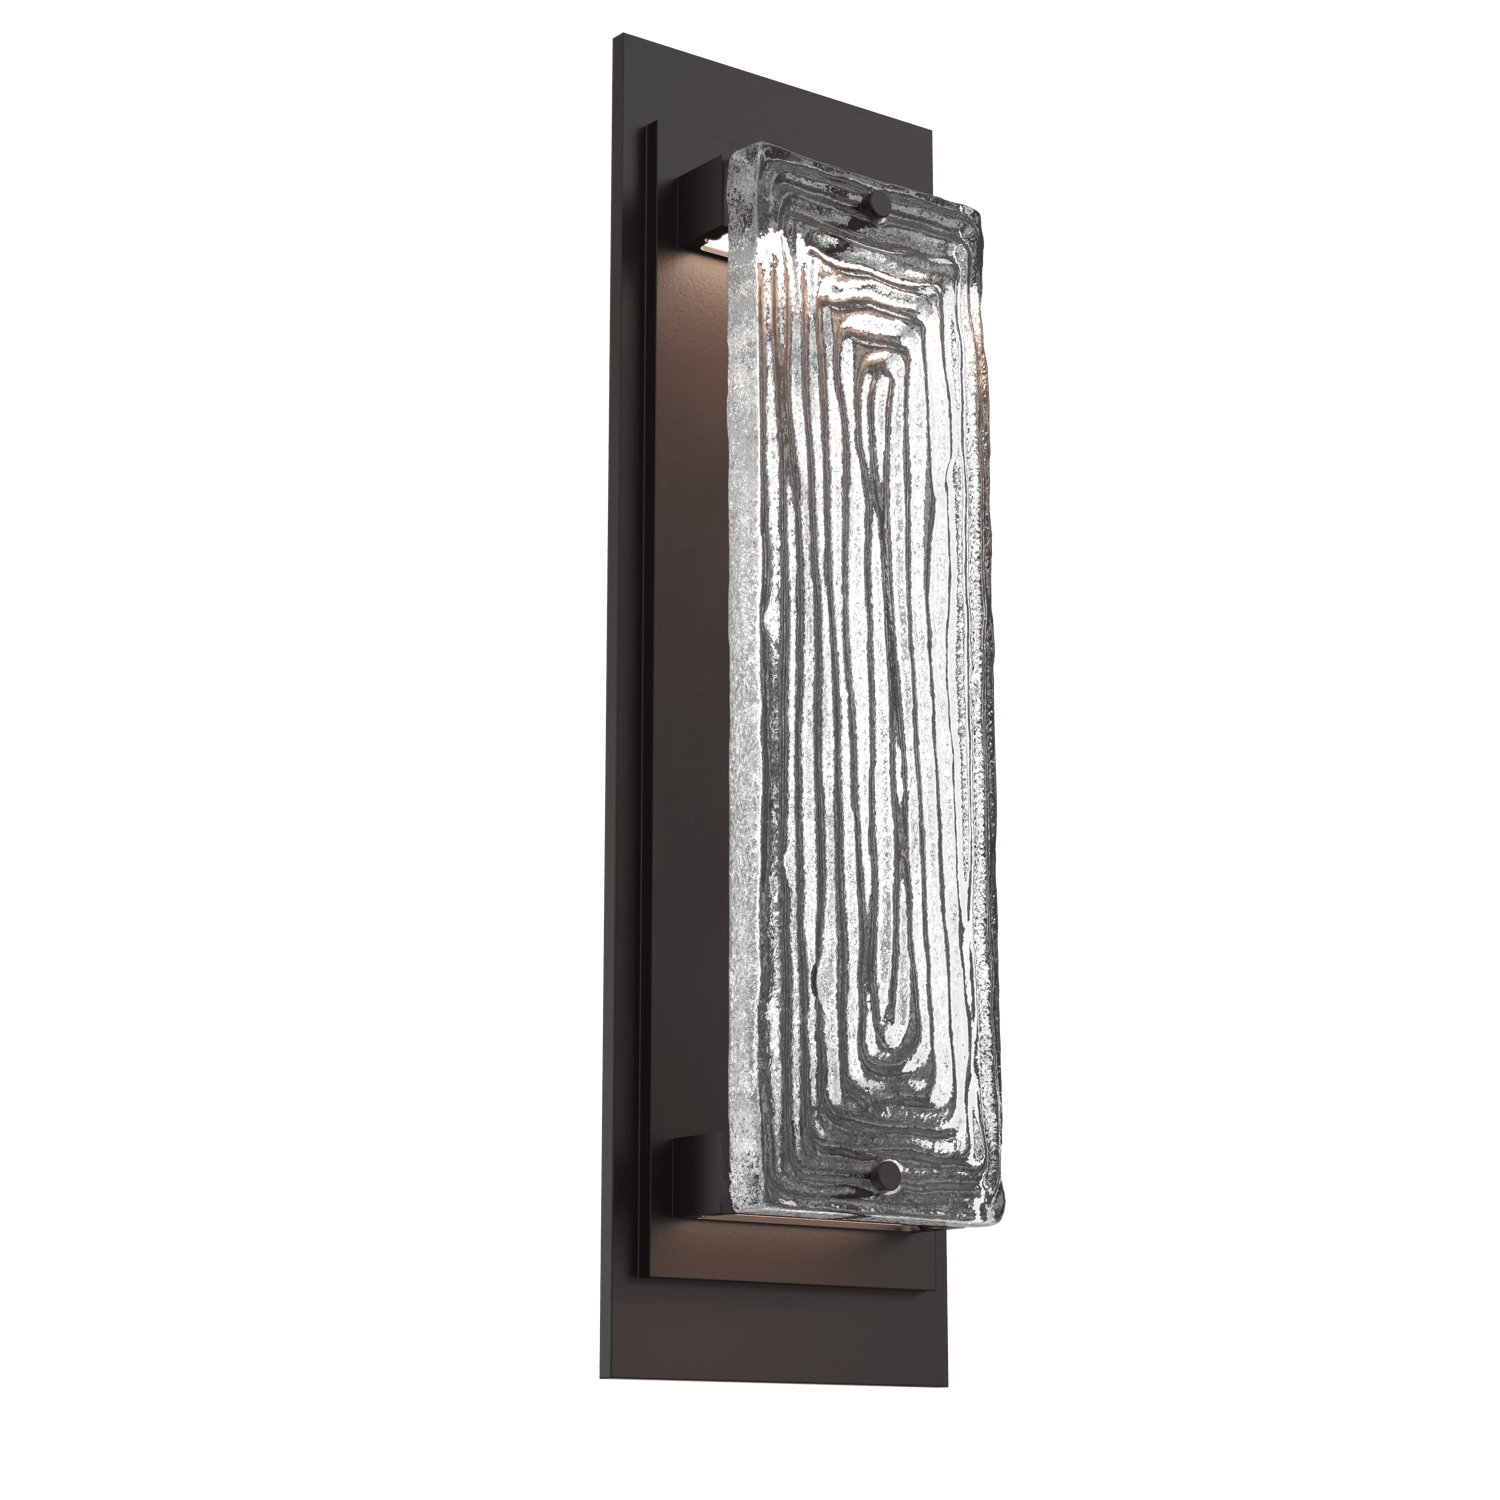 ODB0090-01-SB-TL-Hammerton-Studio-Tabulo-22-inch-outdoor-sconce-with-statuary-bronze-finish-and-clear-linea-cast-glass-shade-and-LED-lamping